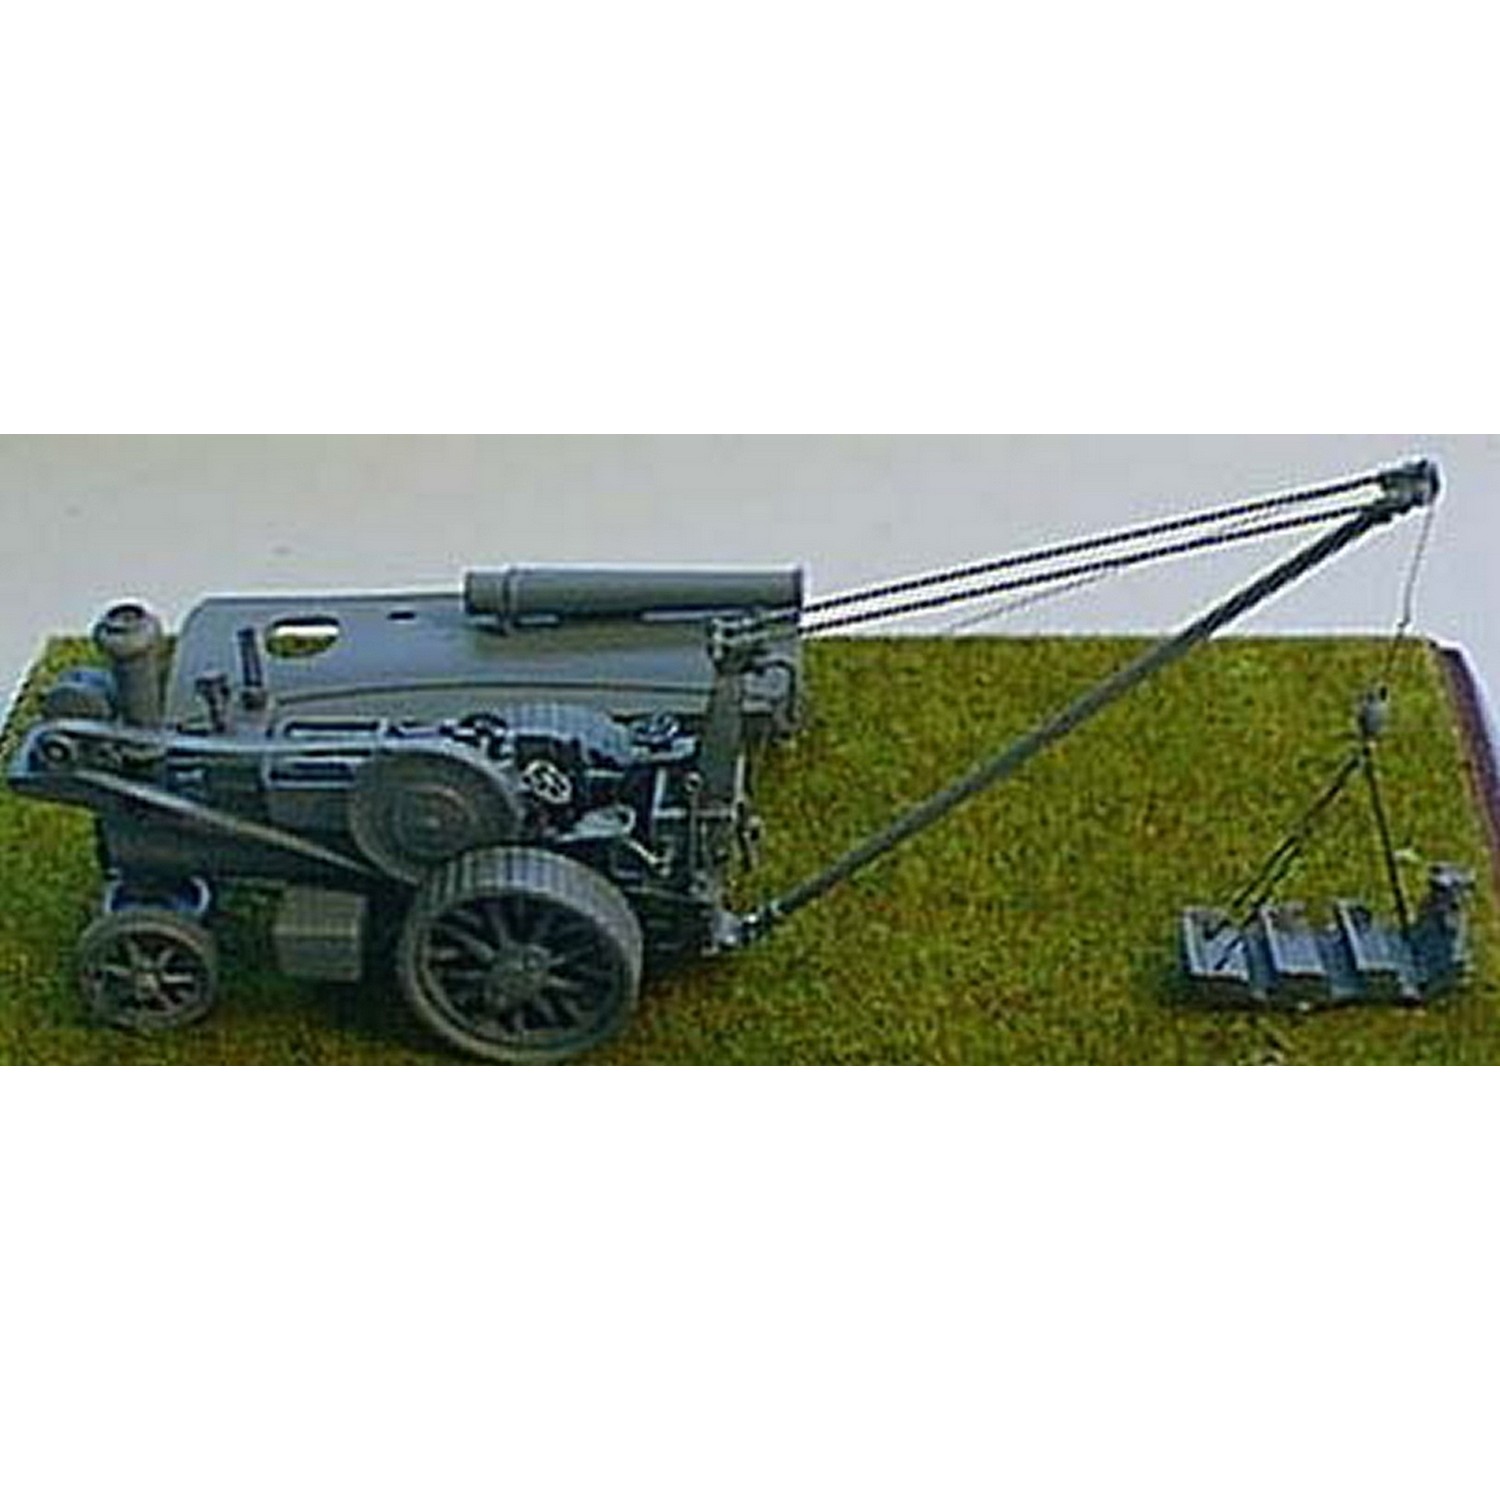 Langley Models Foster Traction Engine OO Scale 1:76 UNPAINTED Funfair Kit Q26-27